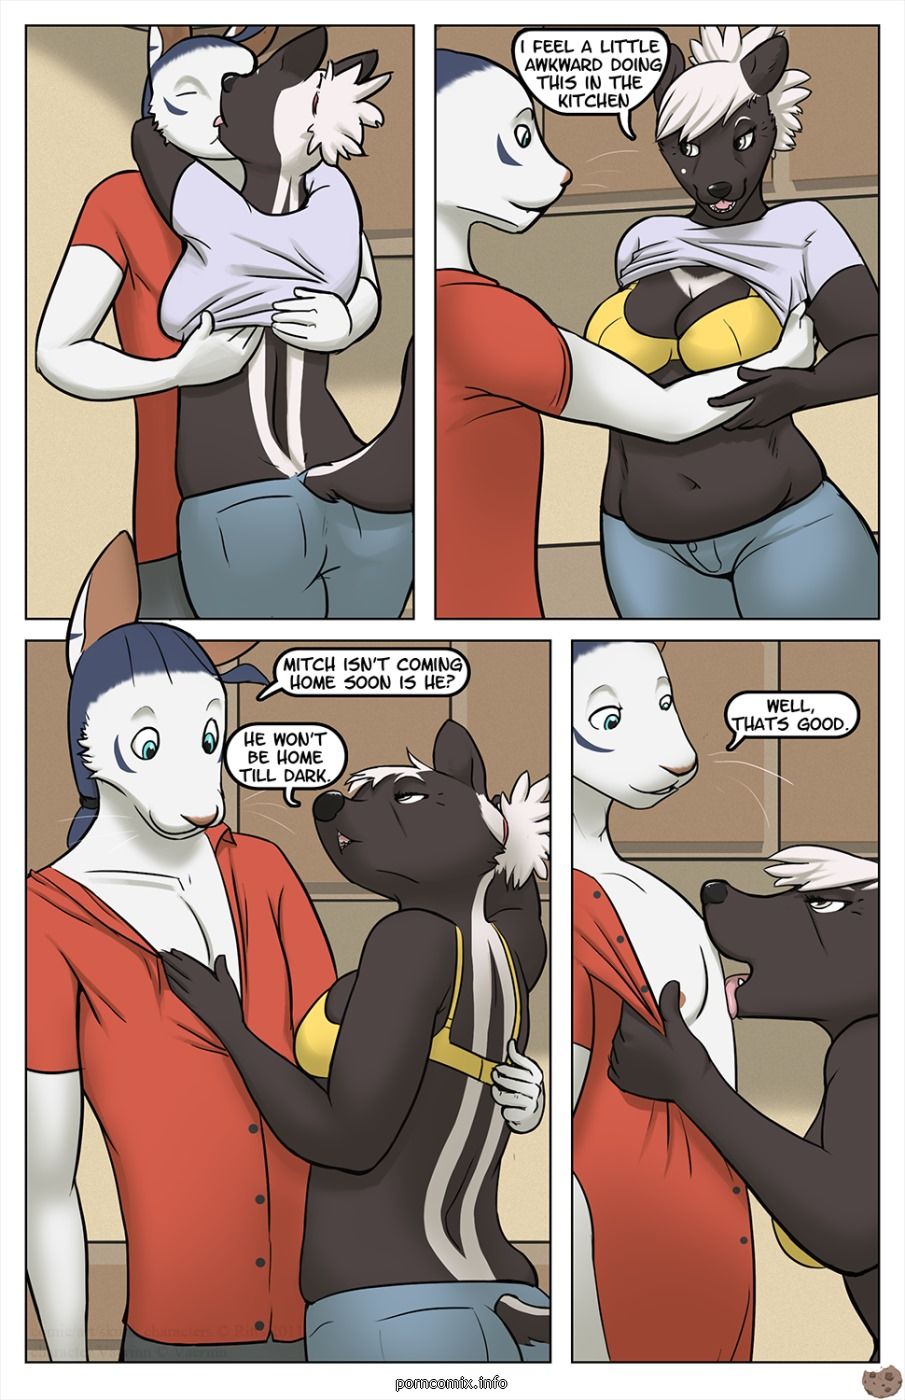 [Ritts] Milf and Cookies, Furry sex page 5